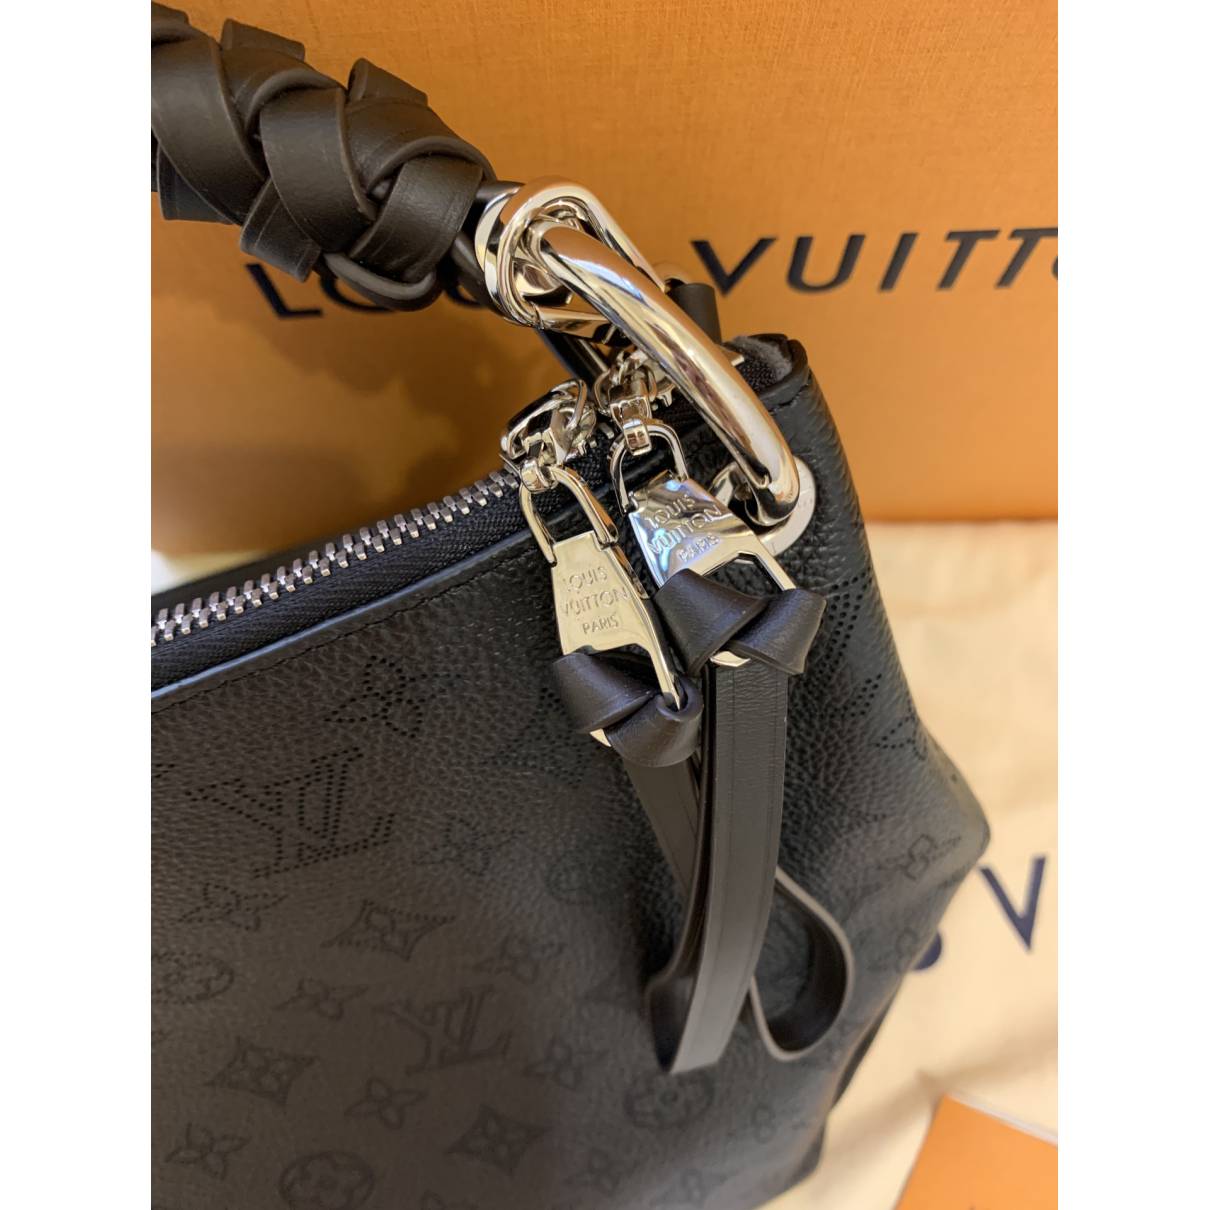 Louis Vuitton, Bags, Authentic Lv Beaubourg Hobo Mm